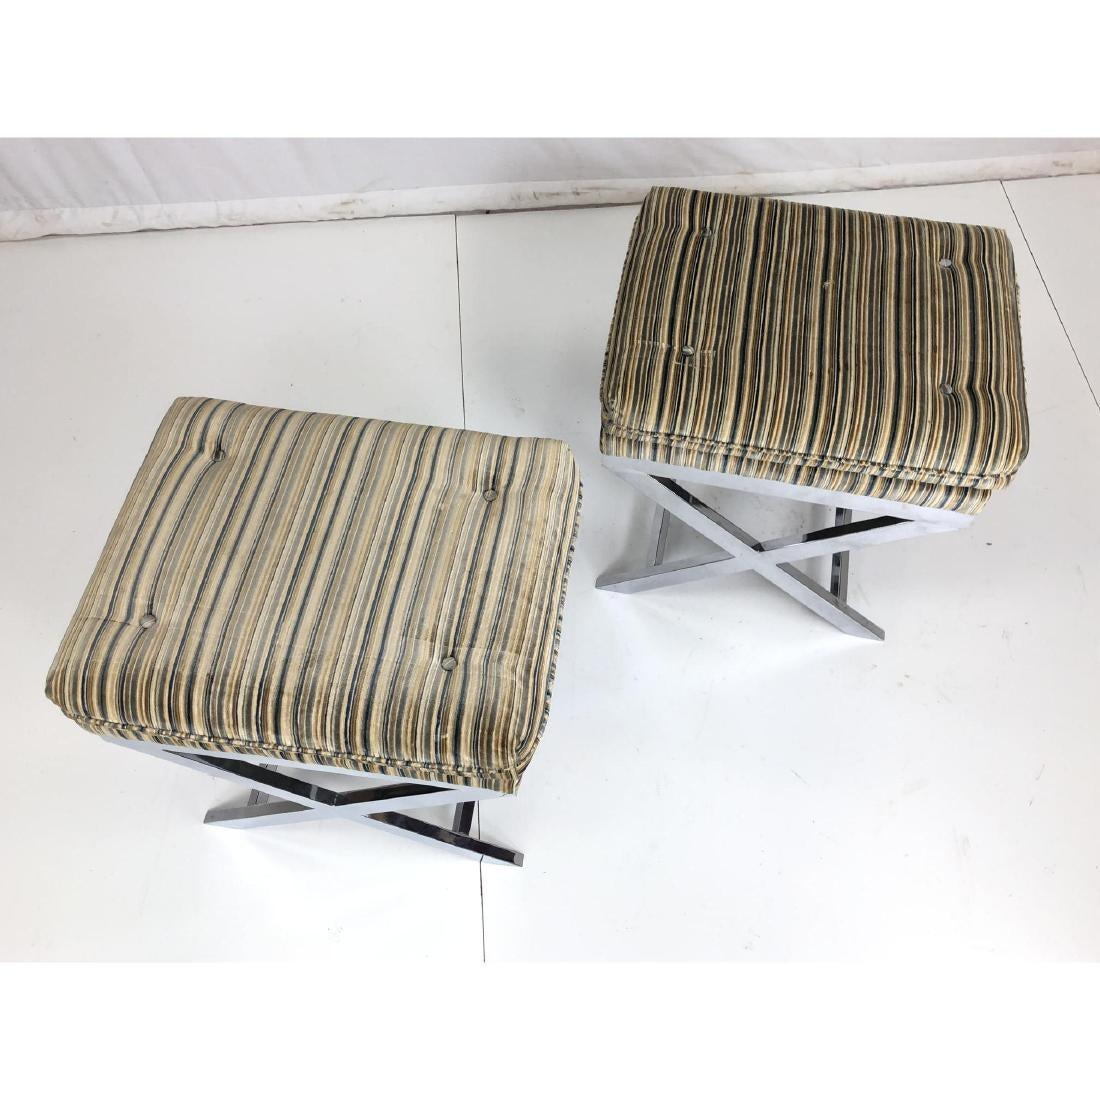 Art Deco Pair of Hollywood Regency Style Decorator Chrome Based X Form Stools or Benches